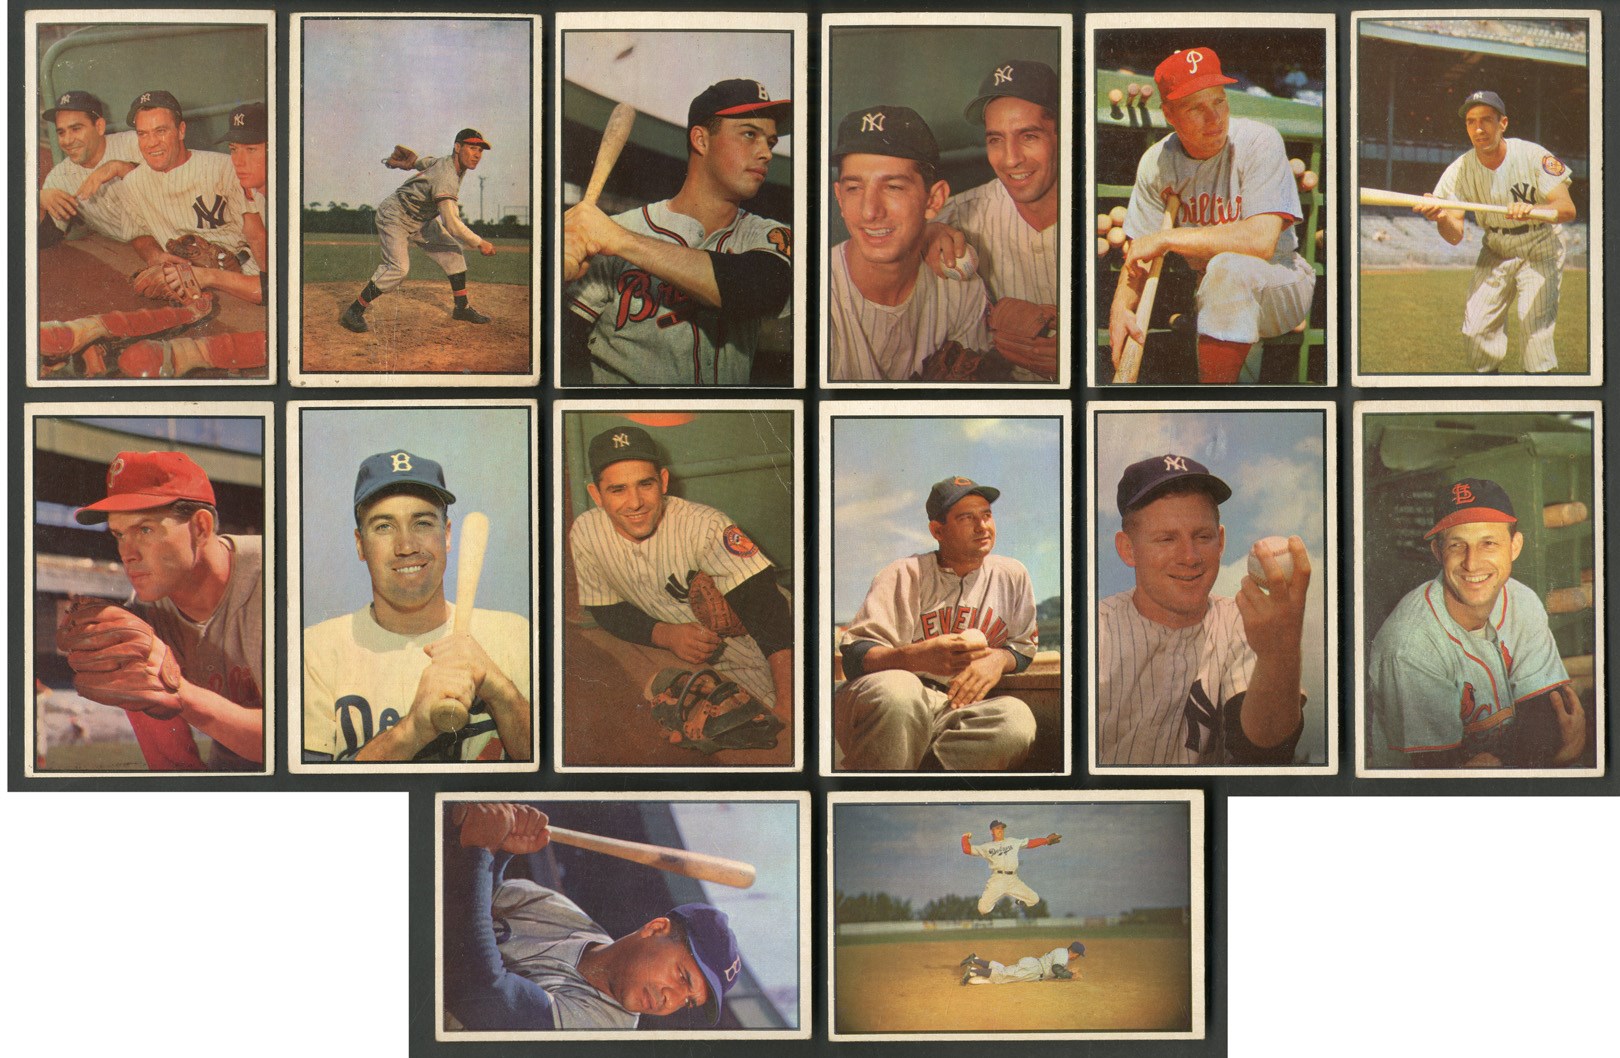 Baseball and Trading Cards - 1953 Bowman Color Collection (14 HOFers with Bauer/Berra/Mantle) - LOADED!